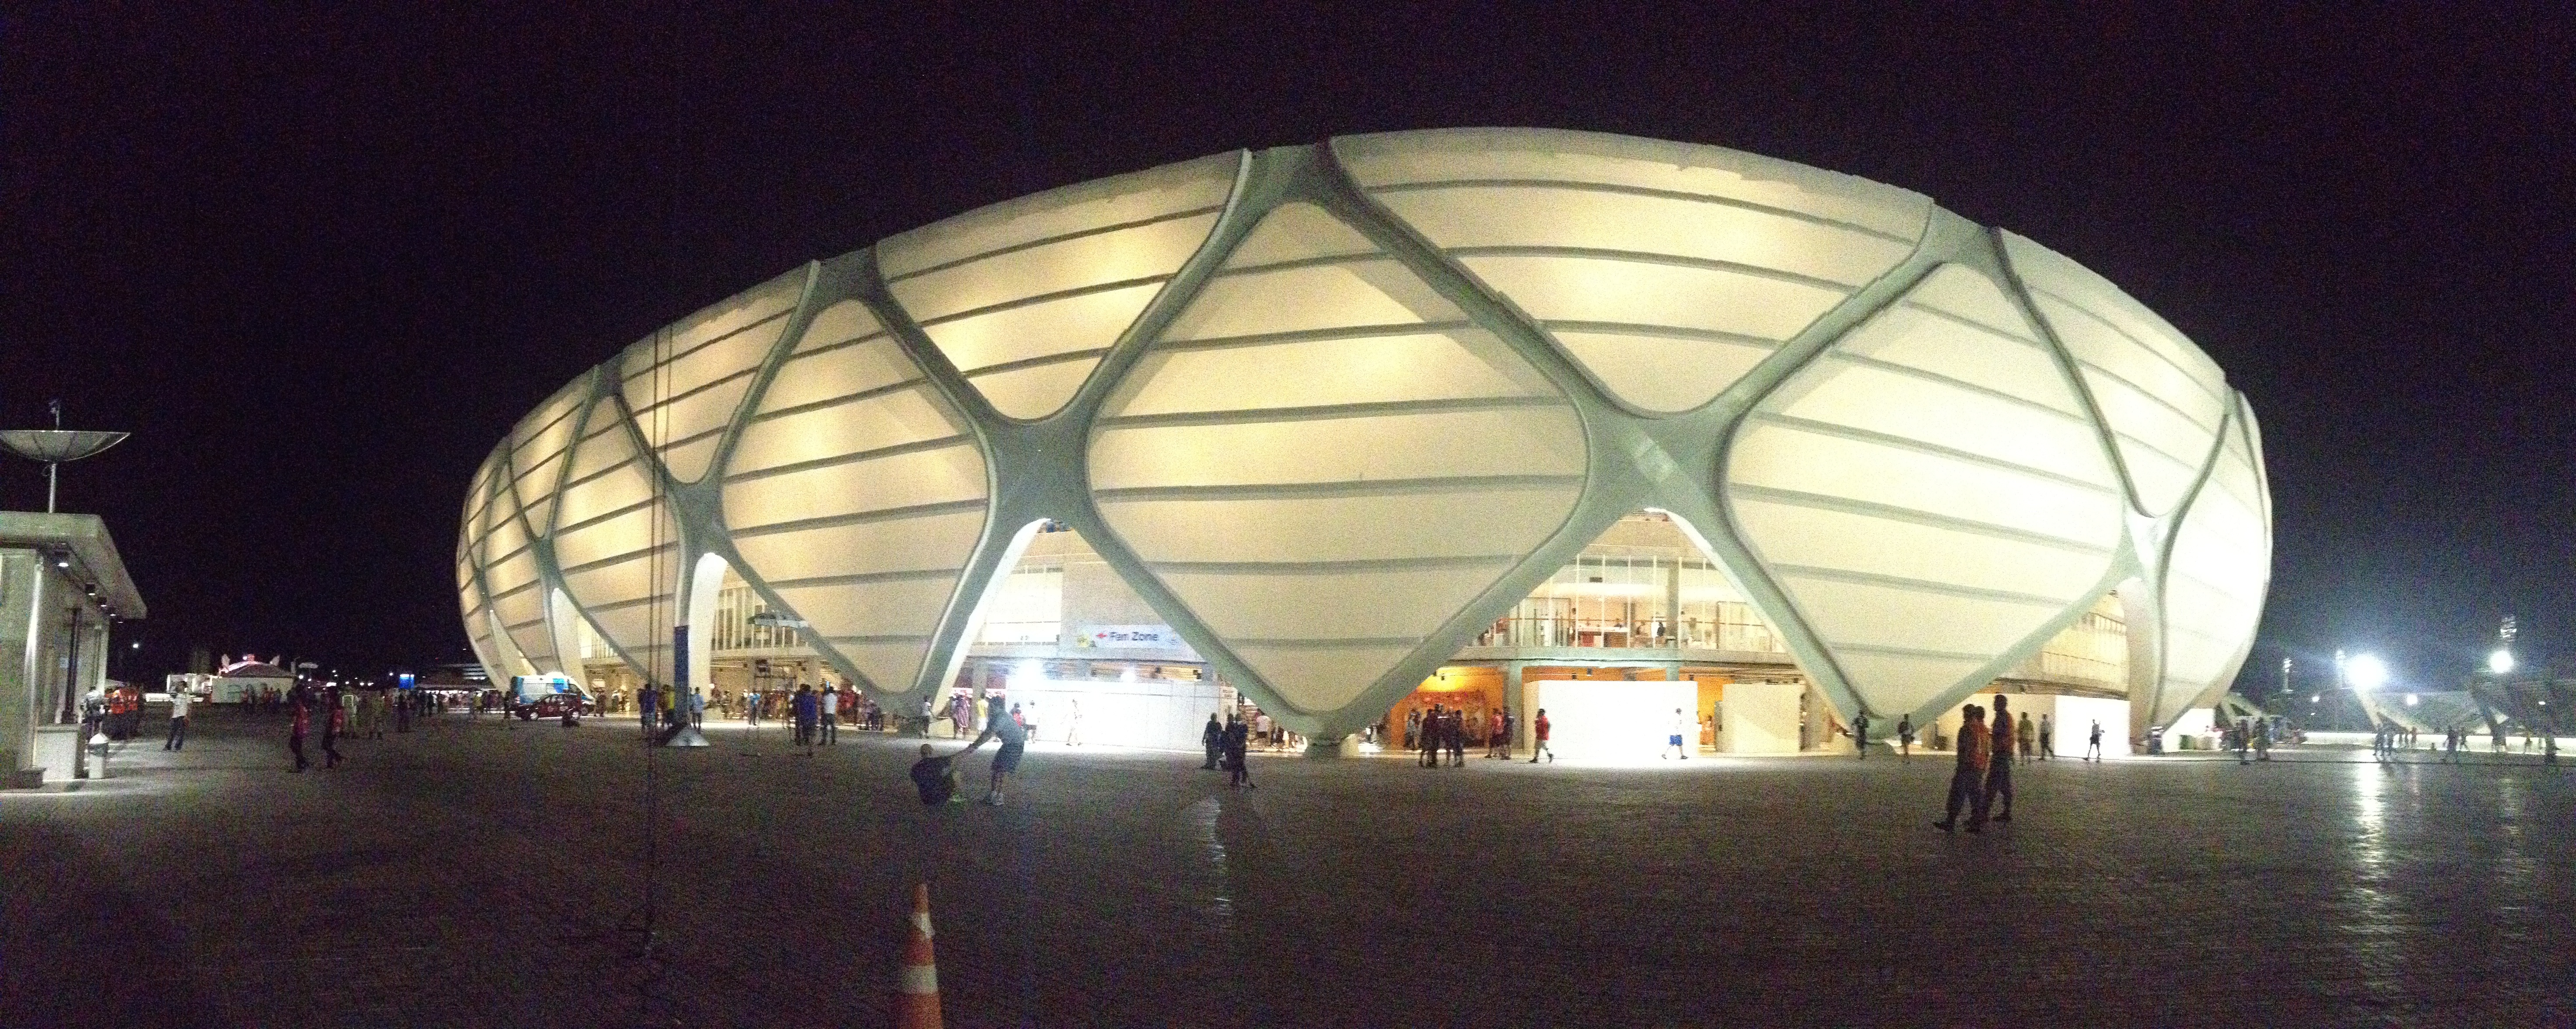 The stadium from out side 